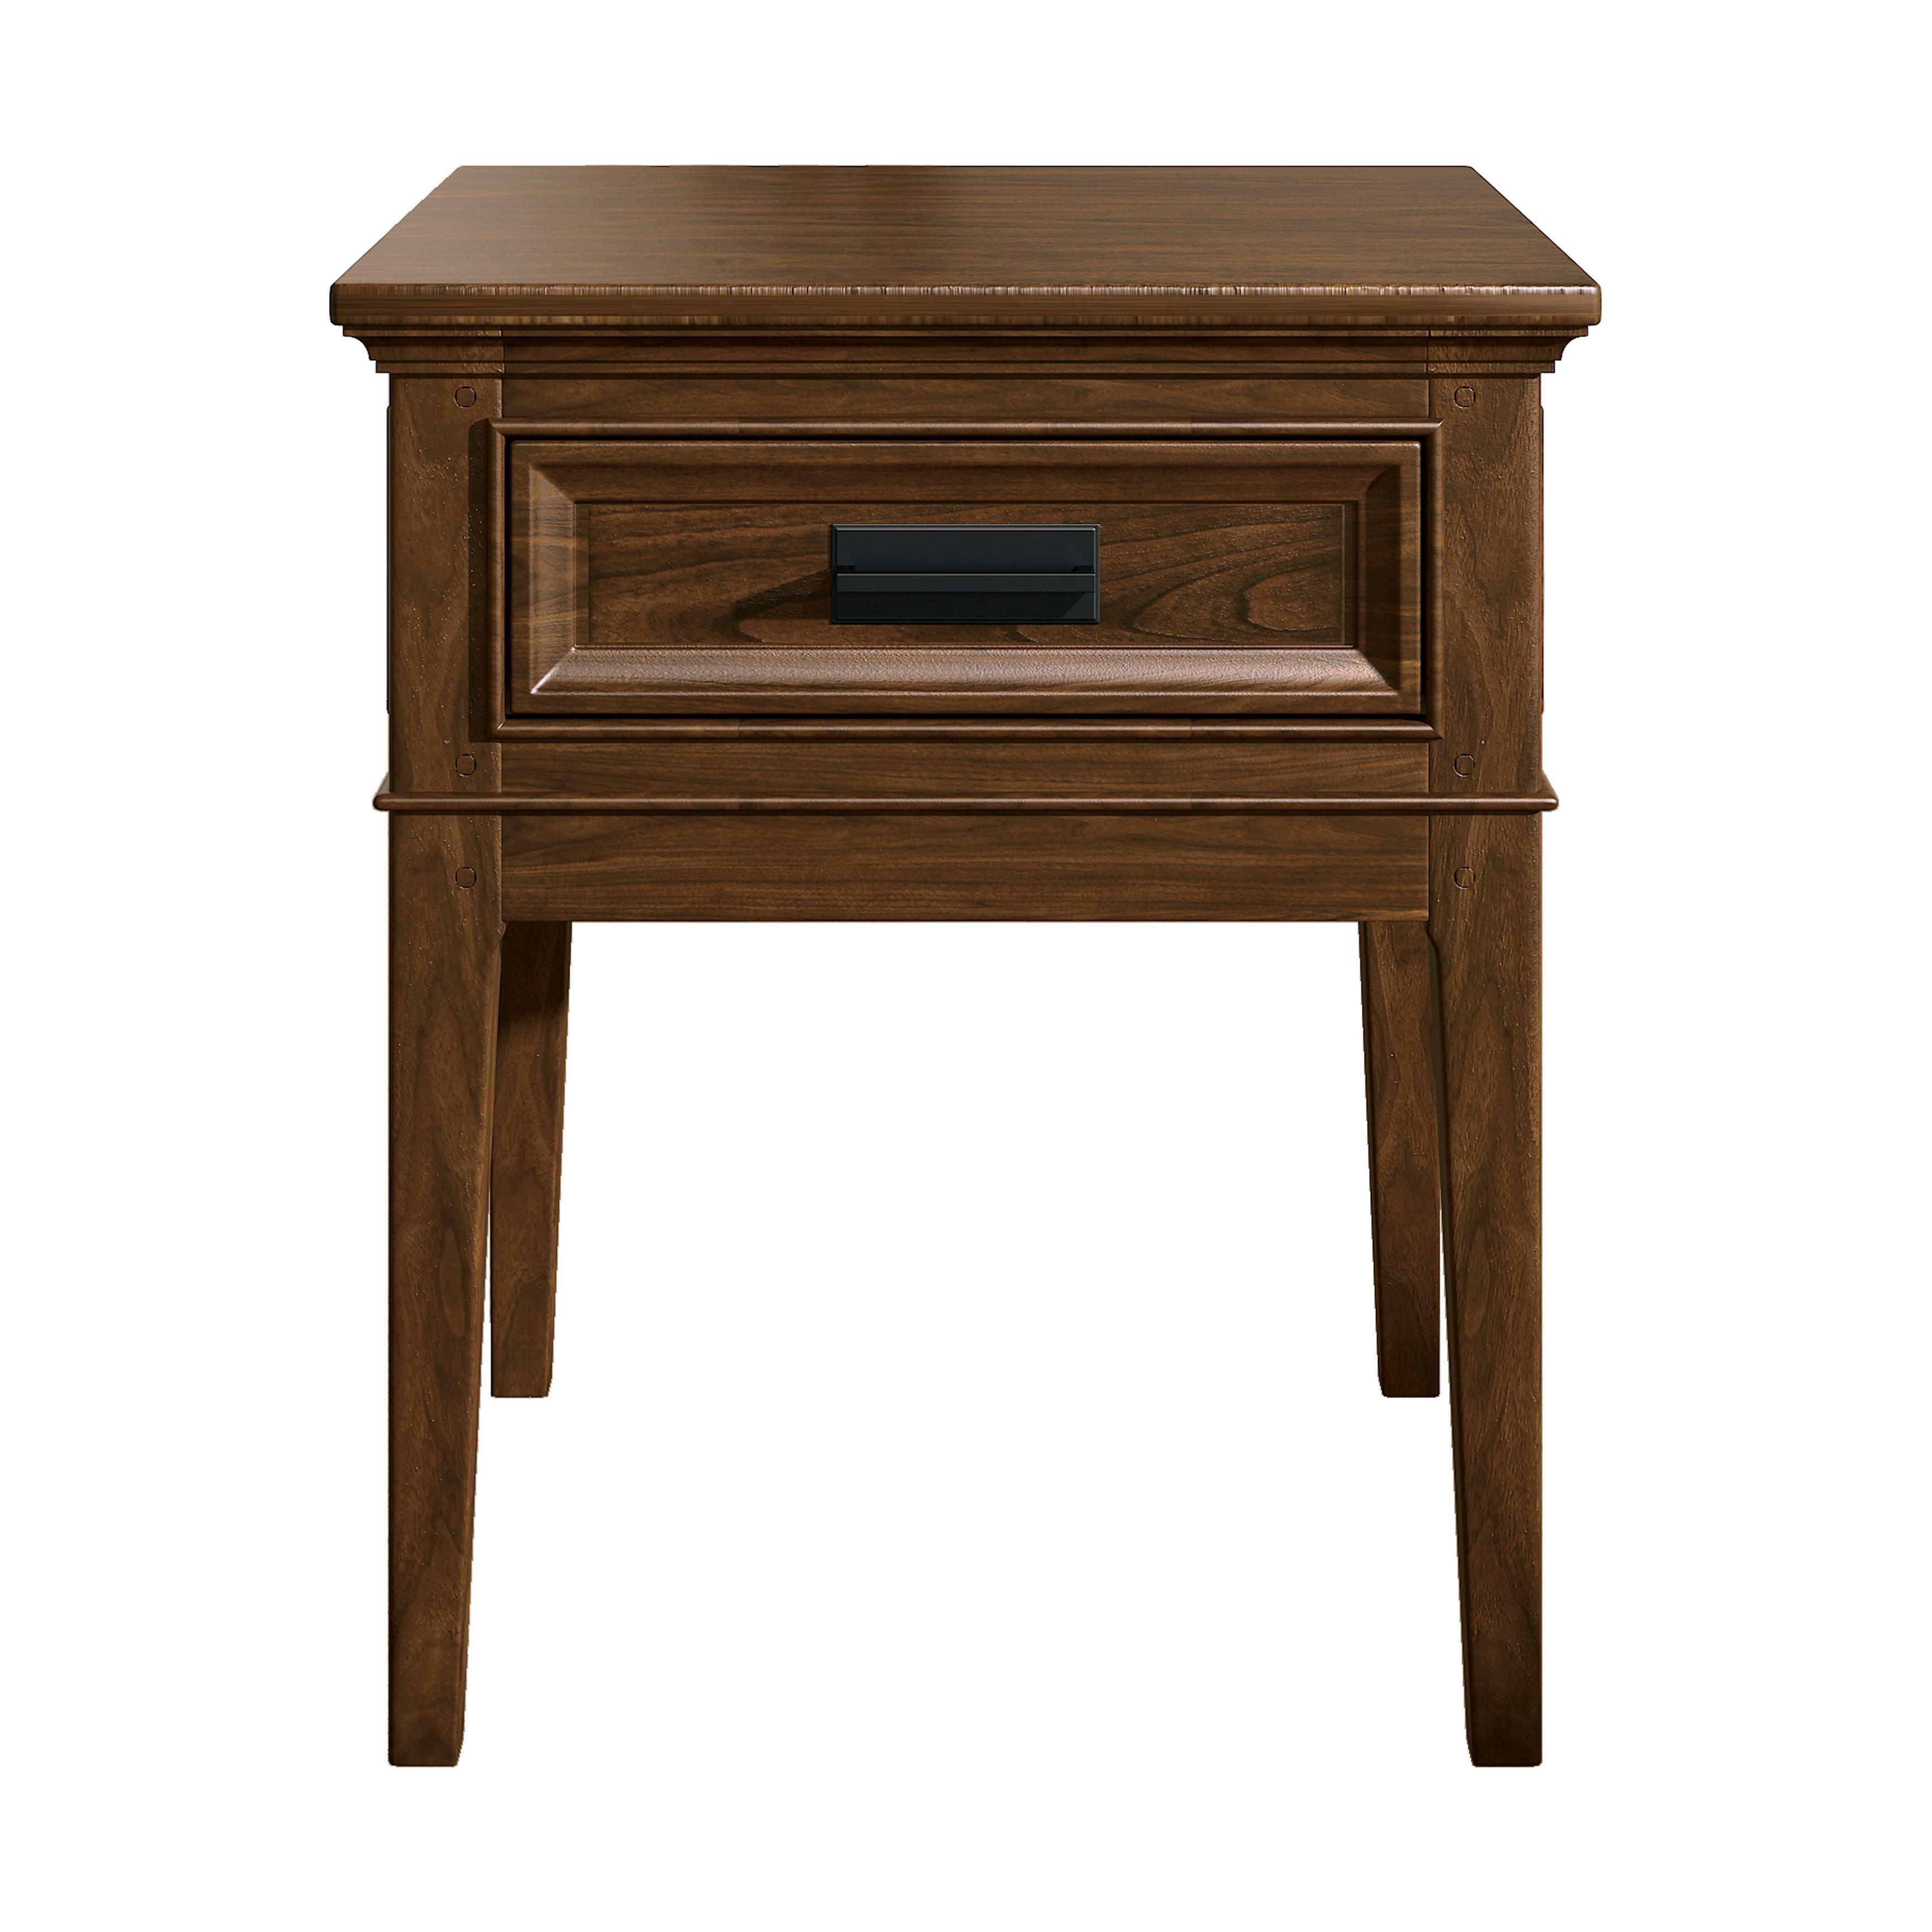 Traditional End Table 1649-04 Frazier Park 1649-04 in Cherry 